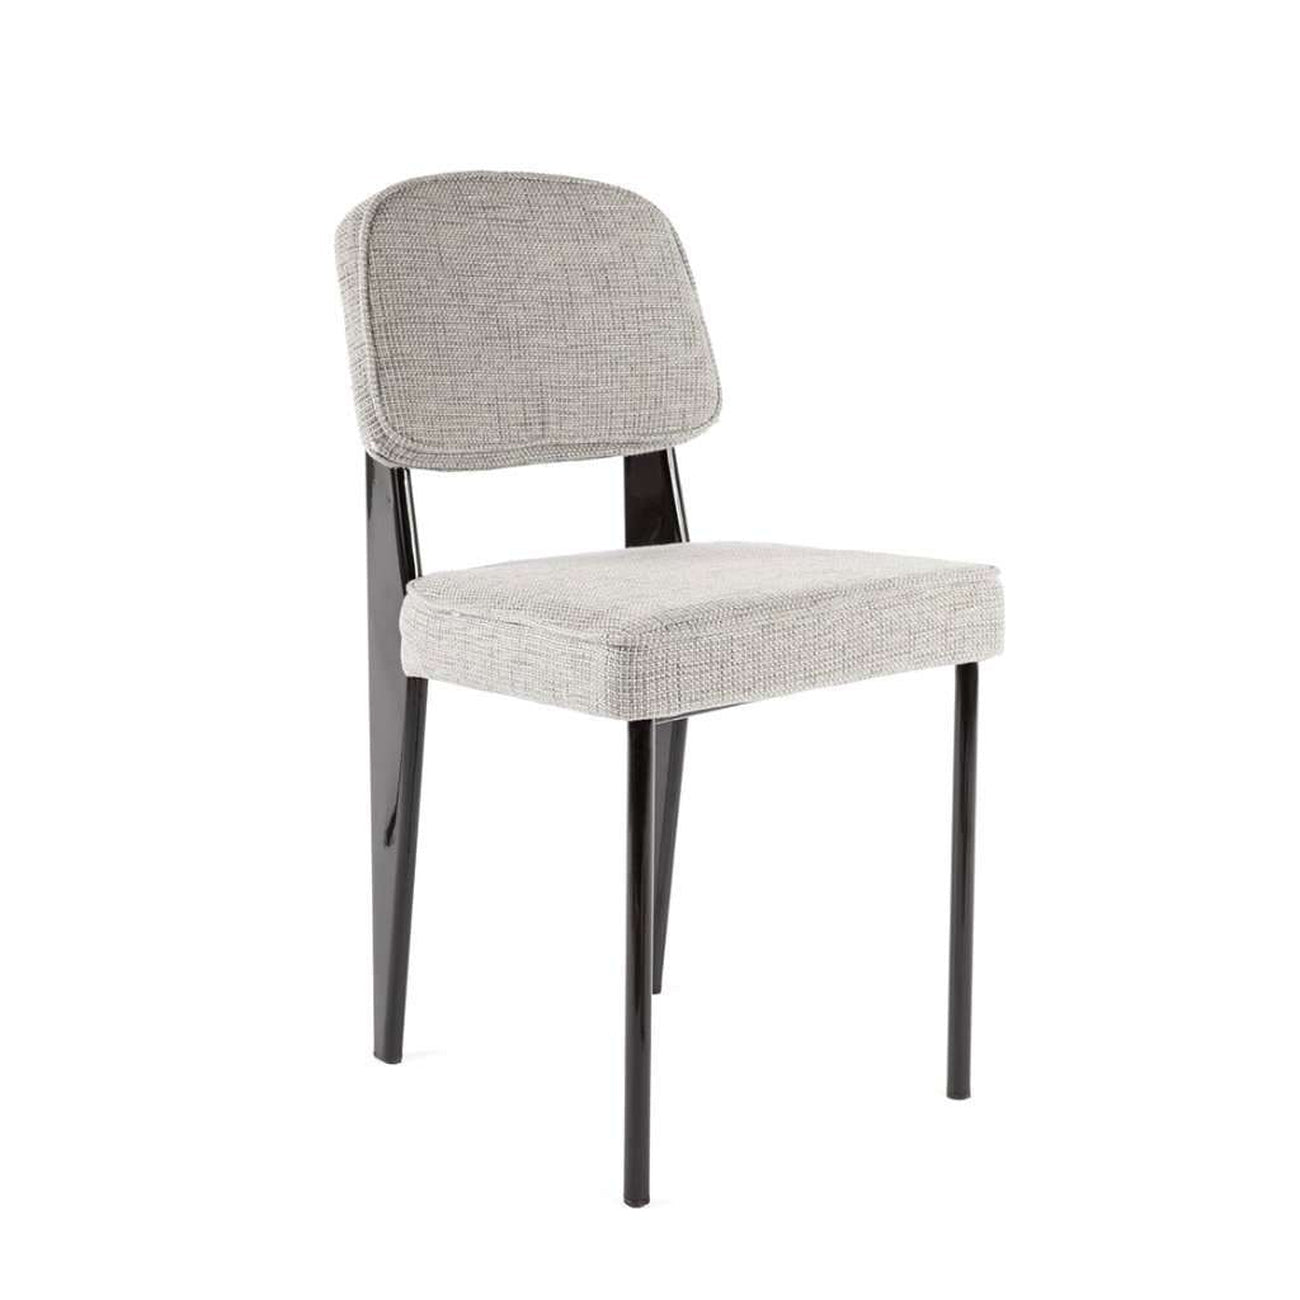 Modern Reproduction Standard Chair - Black with Grey Upholstered Seat Inspired by Jean Prouve